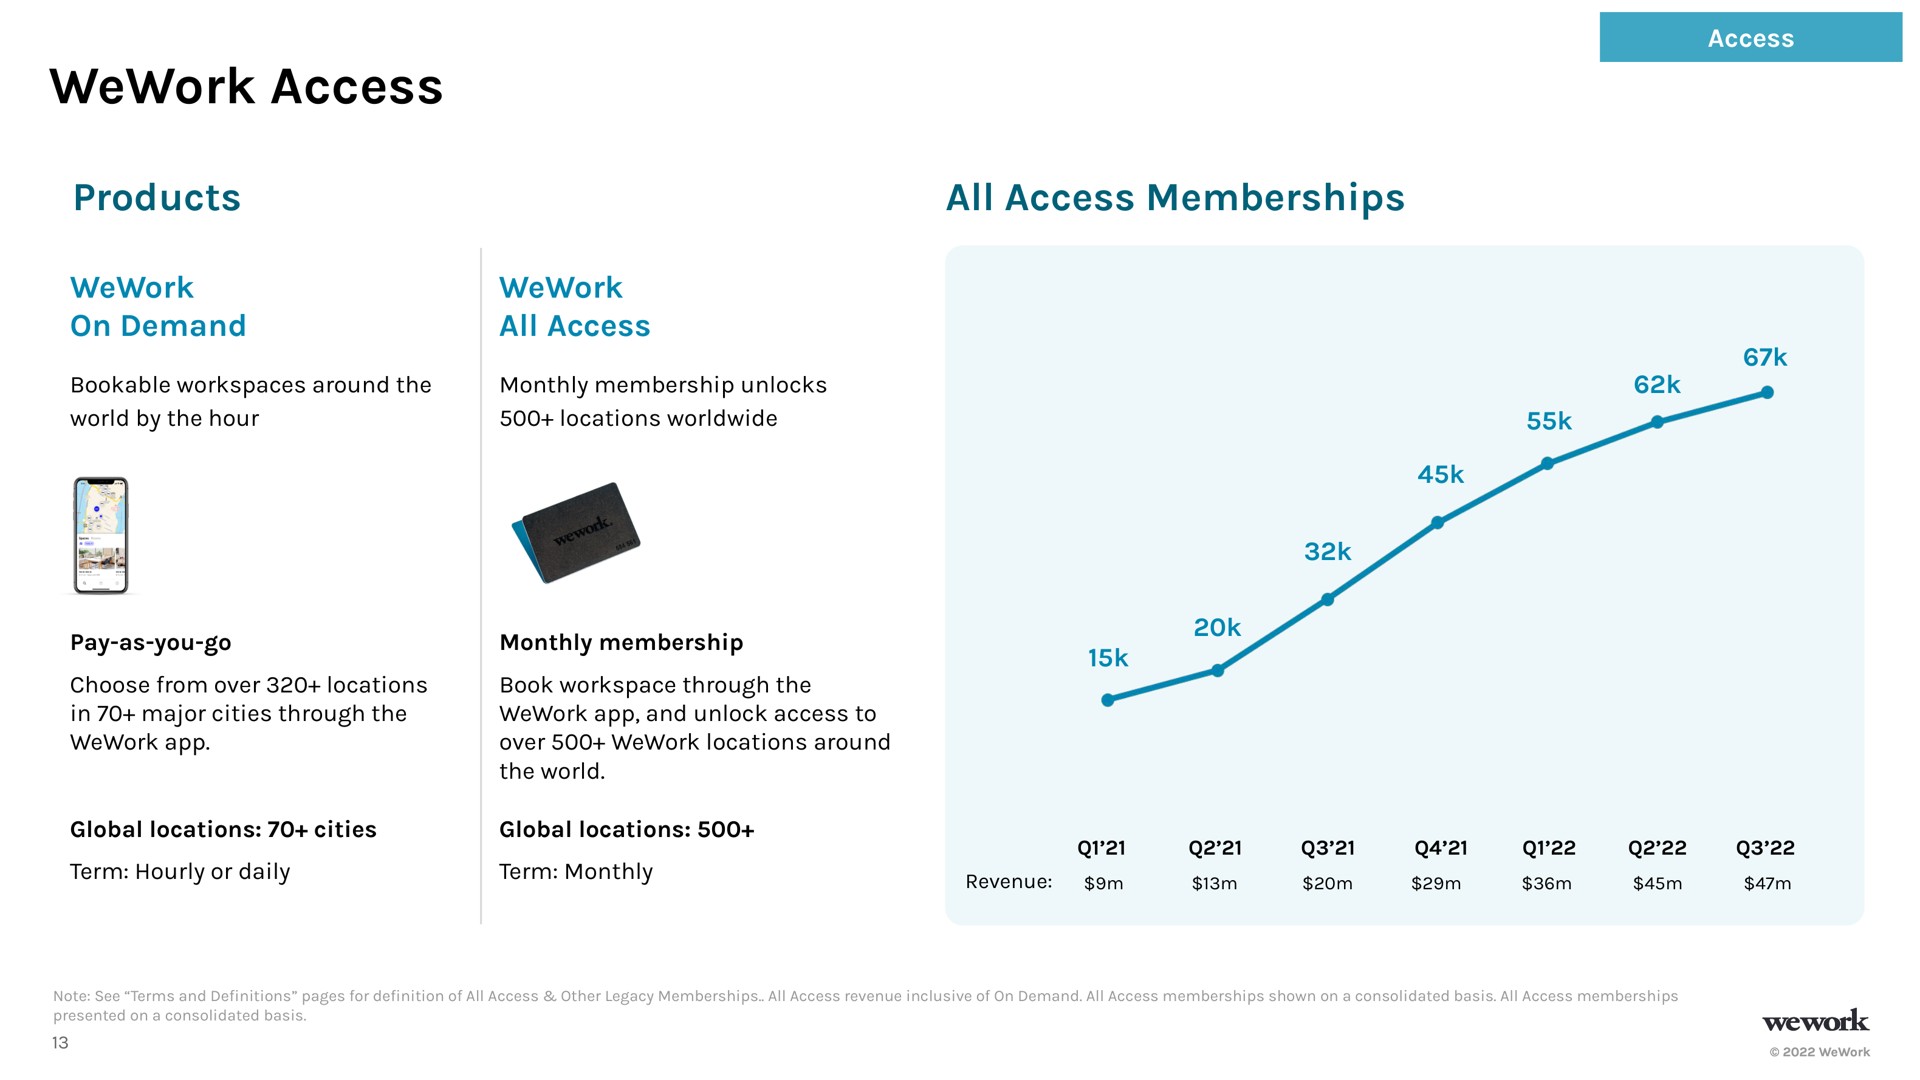 access products all access memberships | WeWork